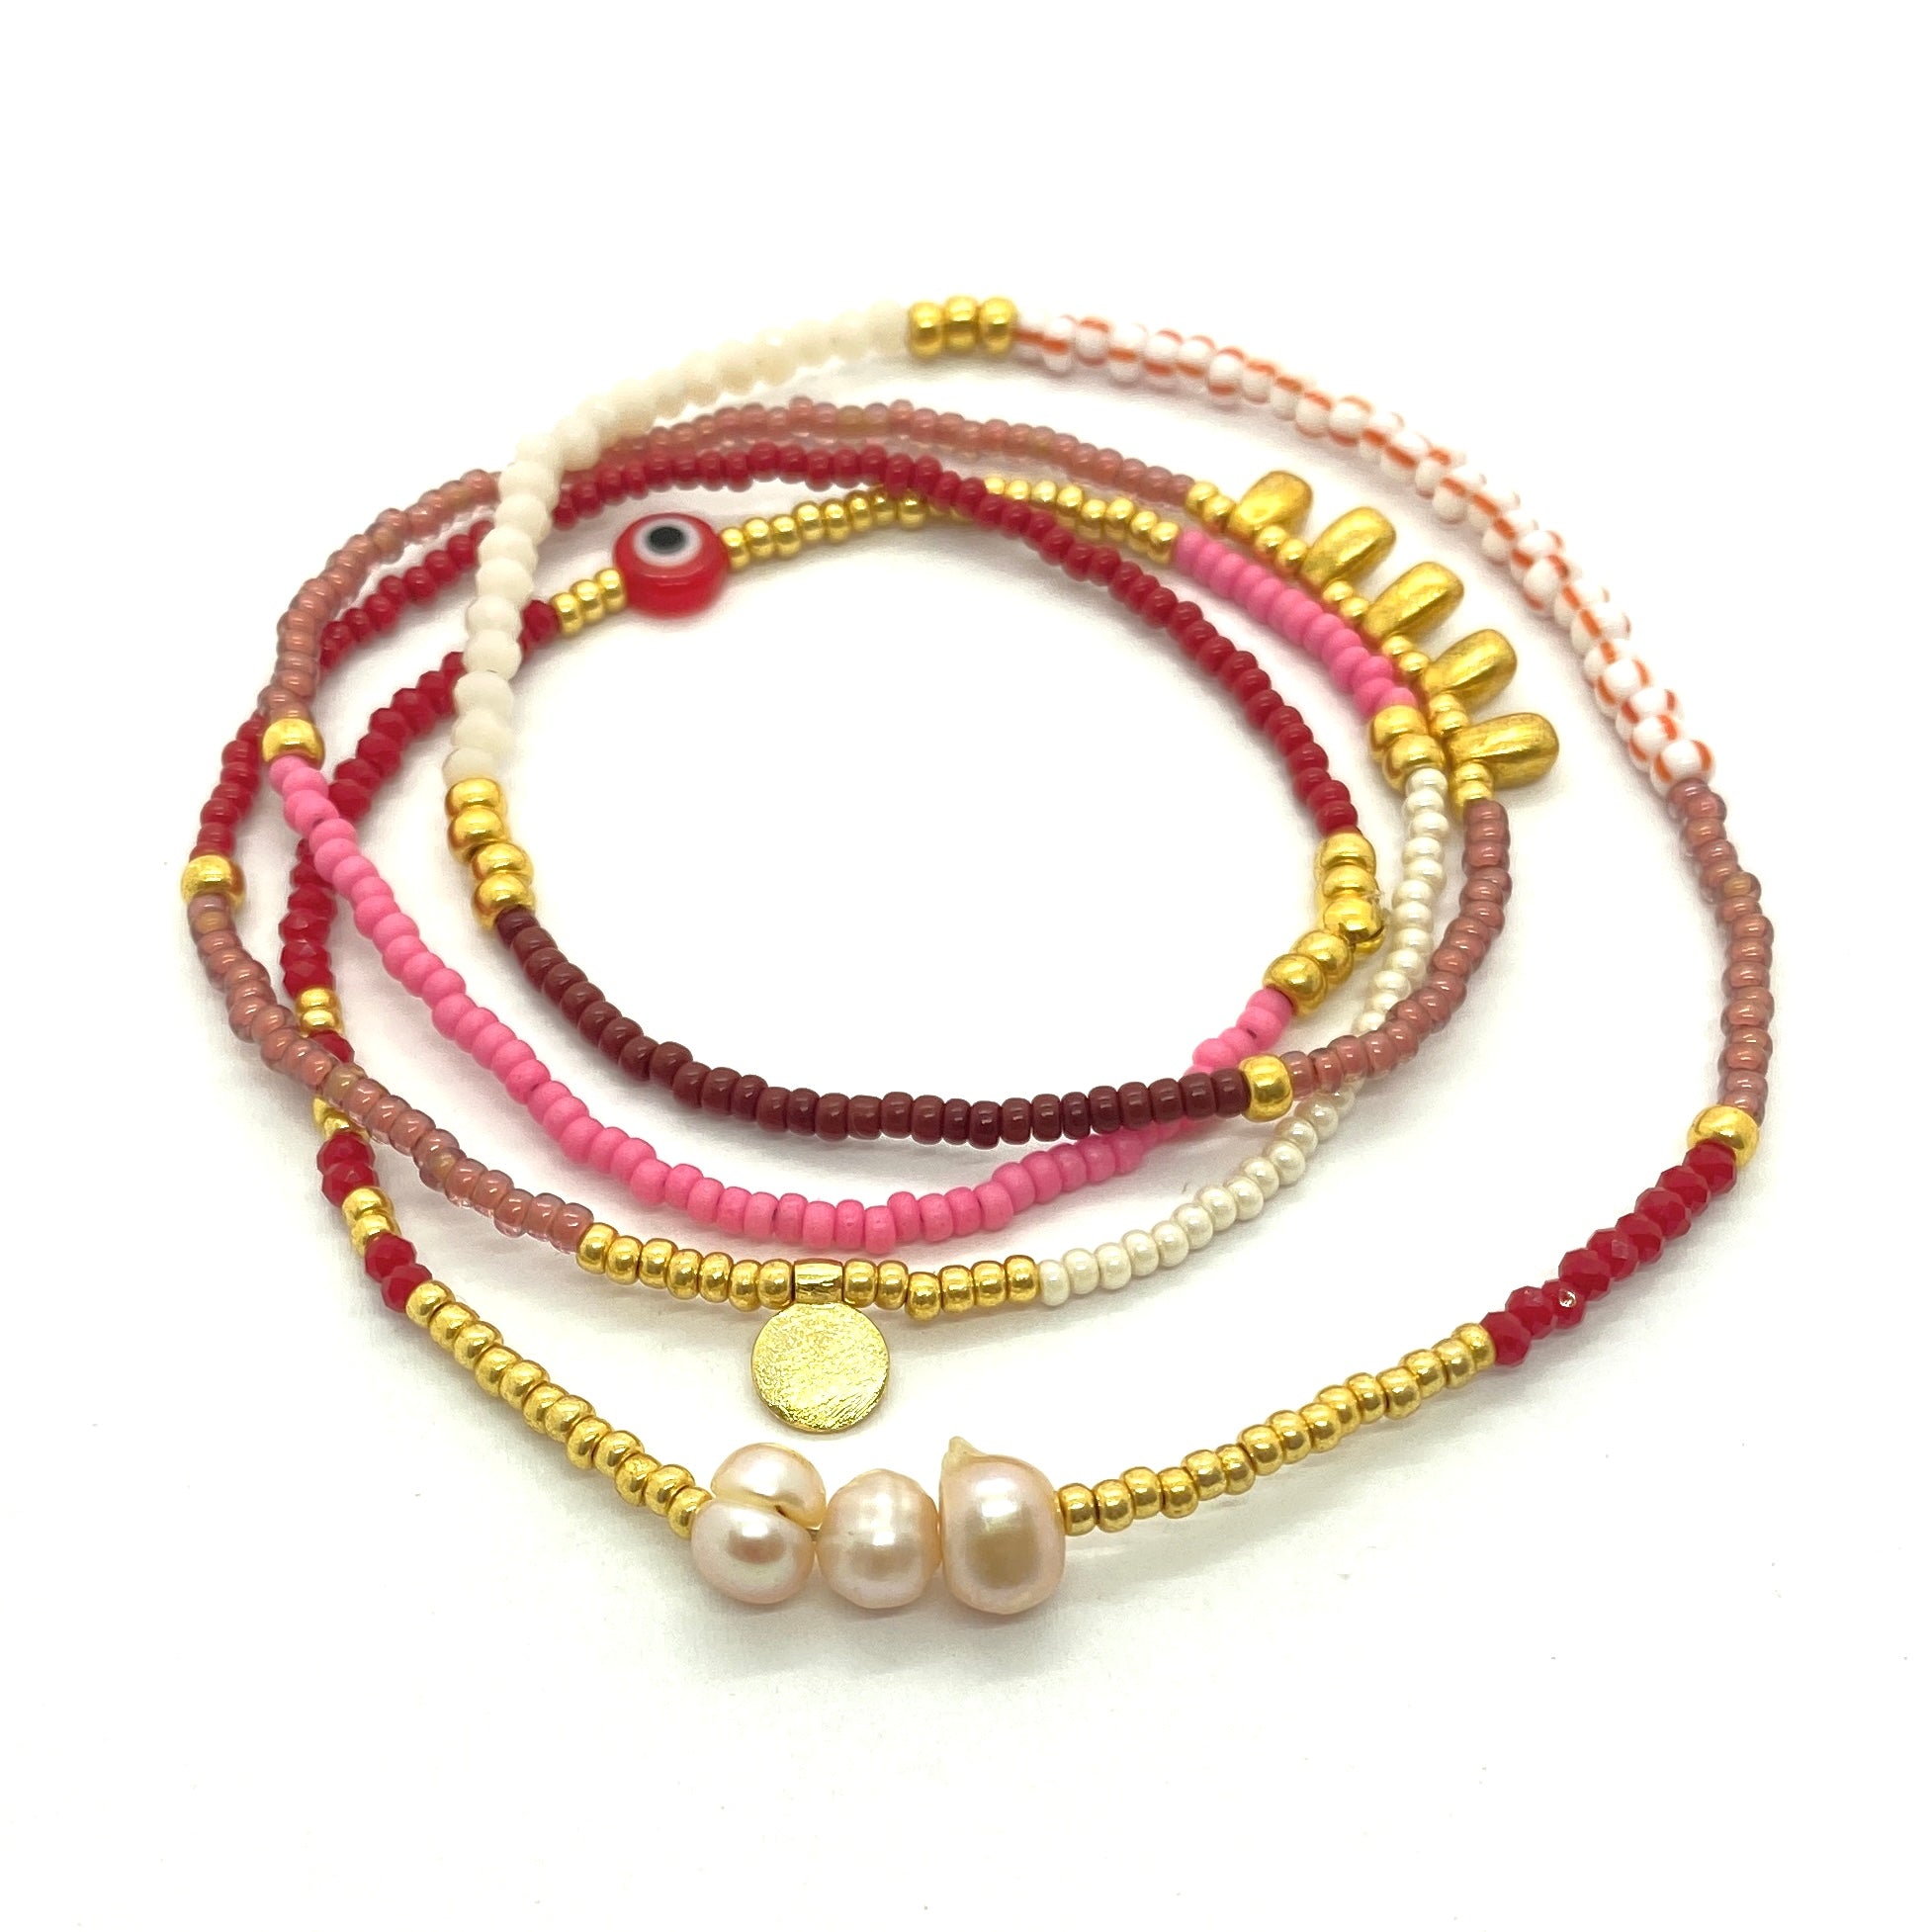 THE MAKERY LOOPSTRING WITH THREE PEARLS IN SHADES OF RED PINK